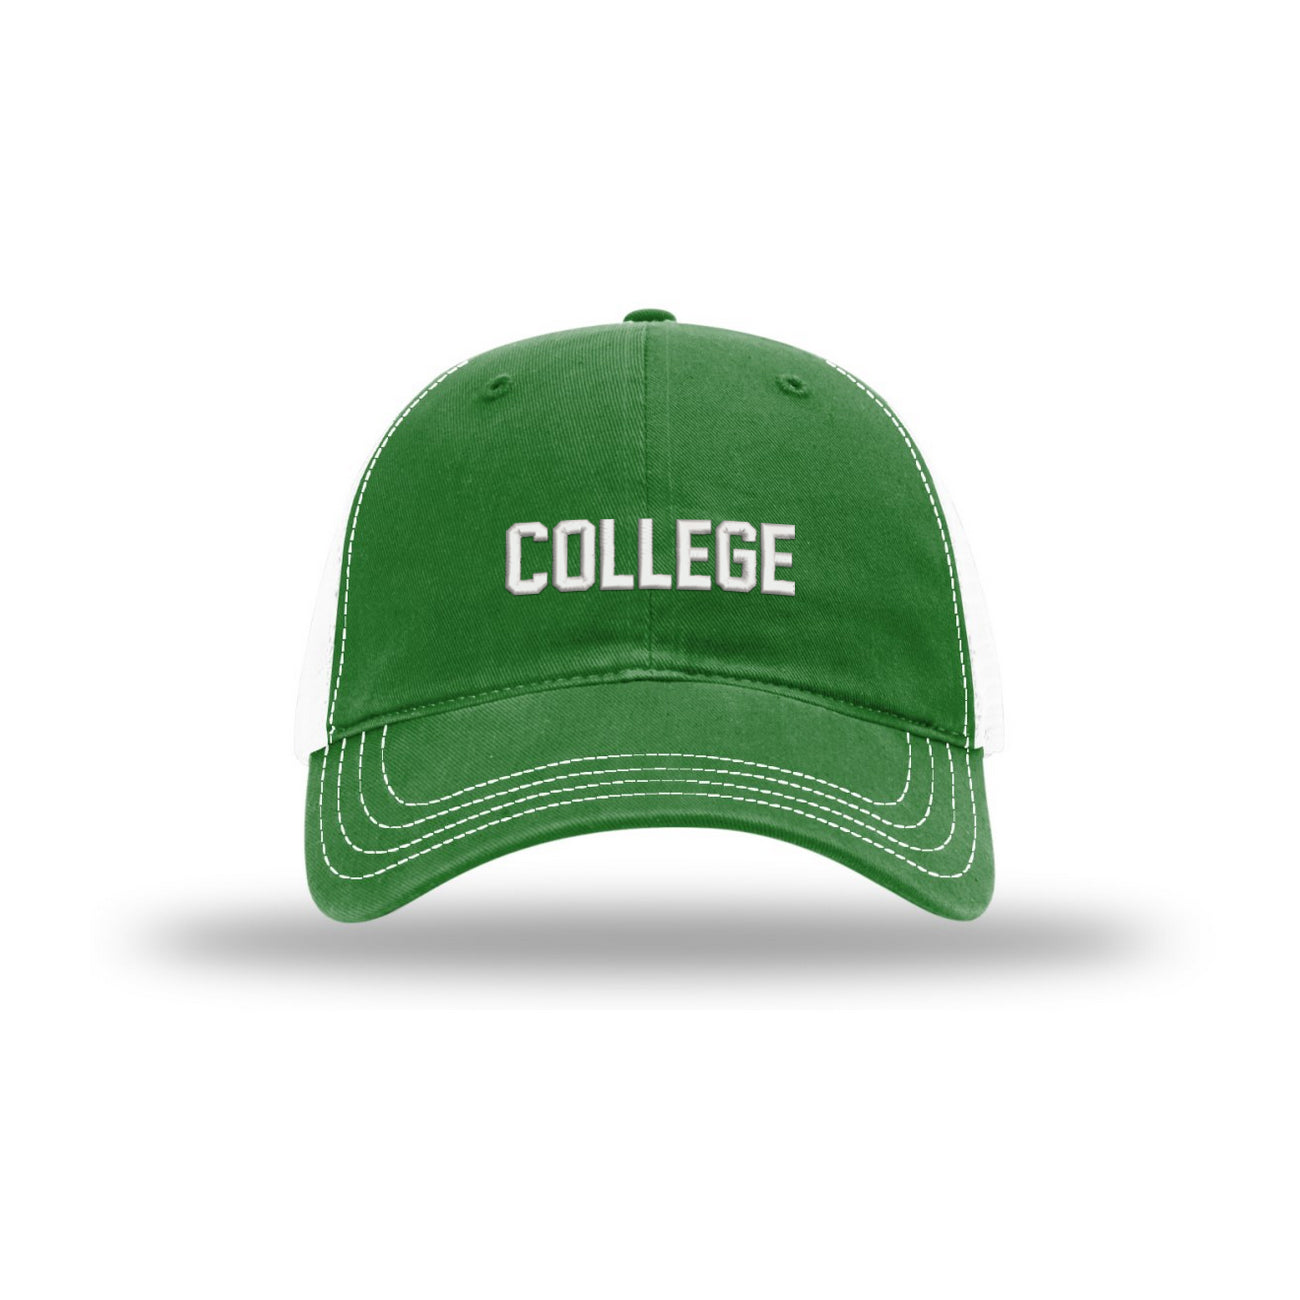 COLLEGE - Choose Your Style Hat